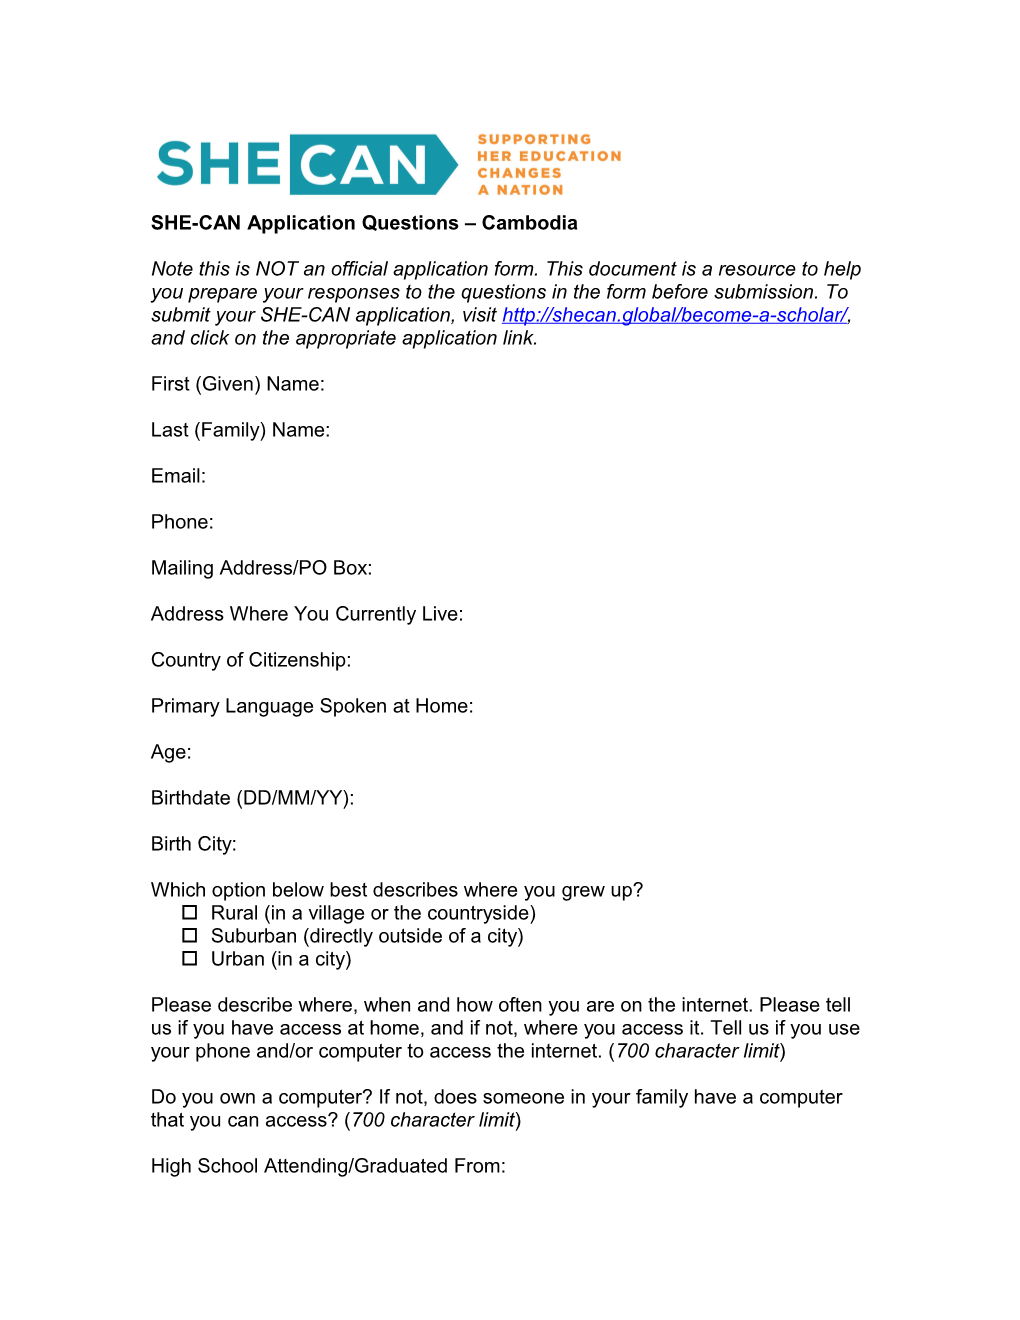 SHE-CAN Application Questions Cambodia